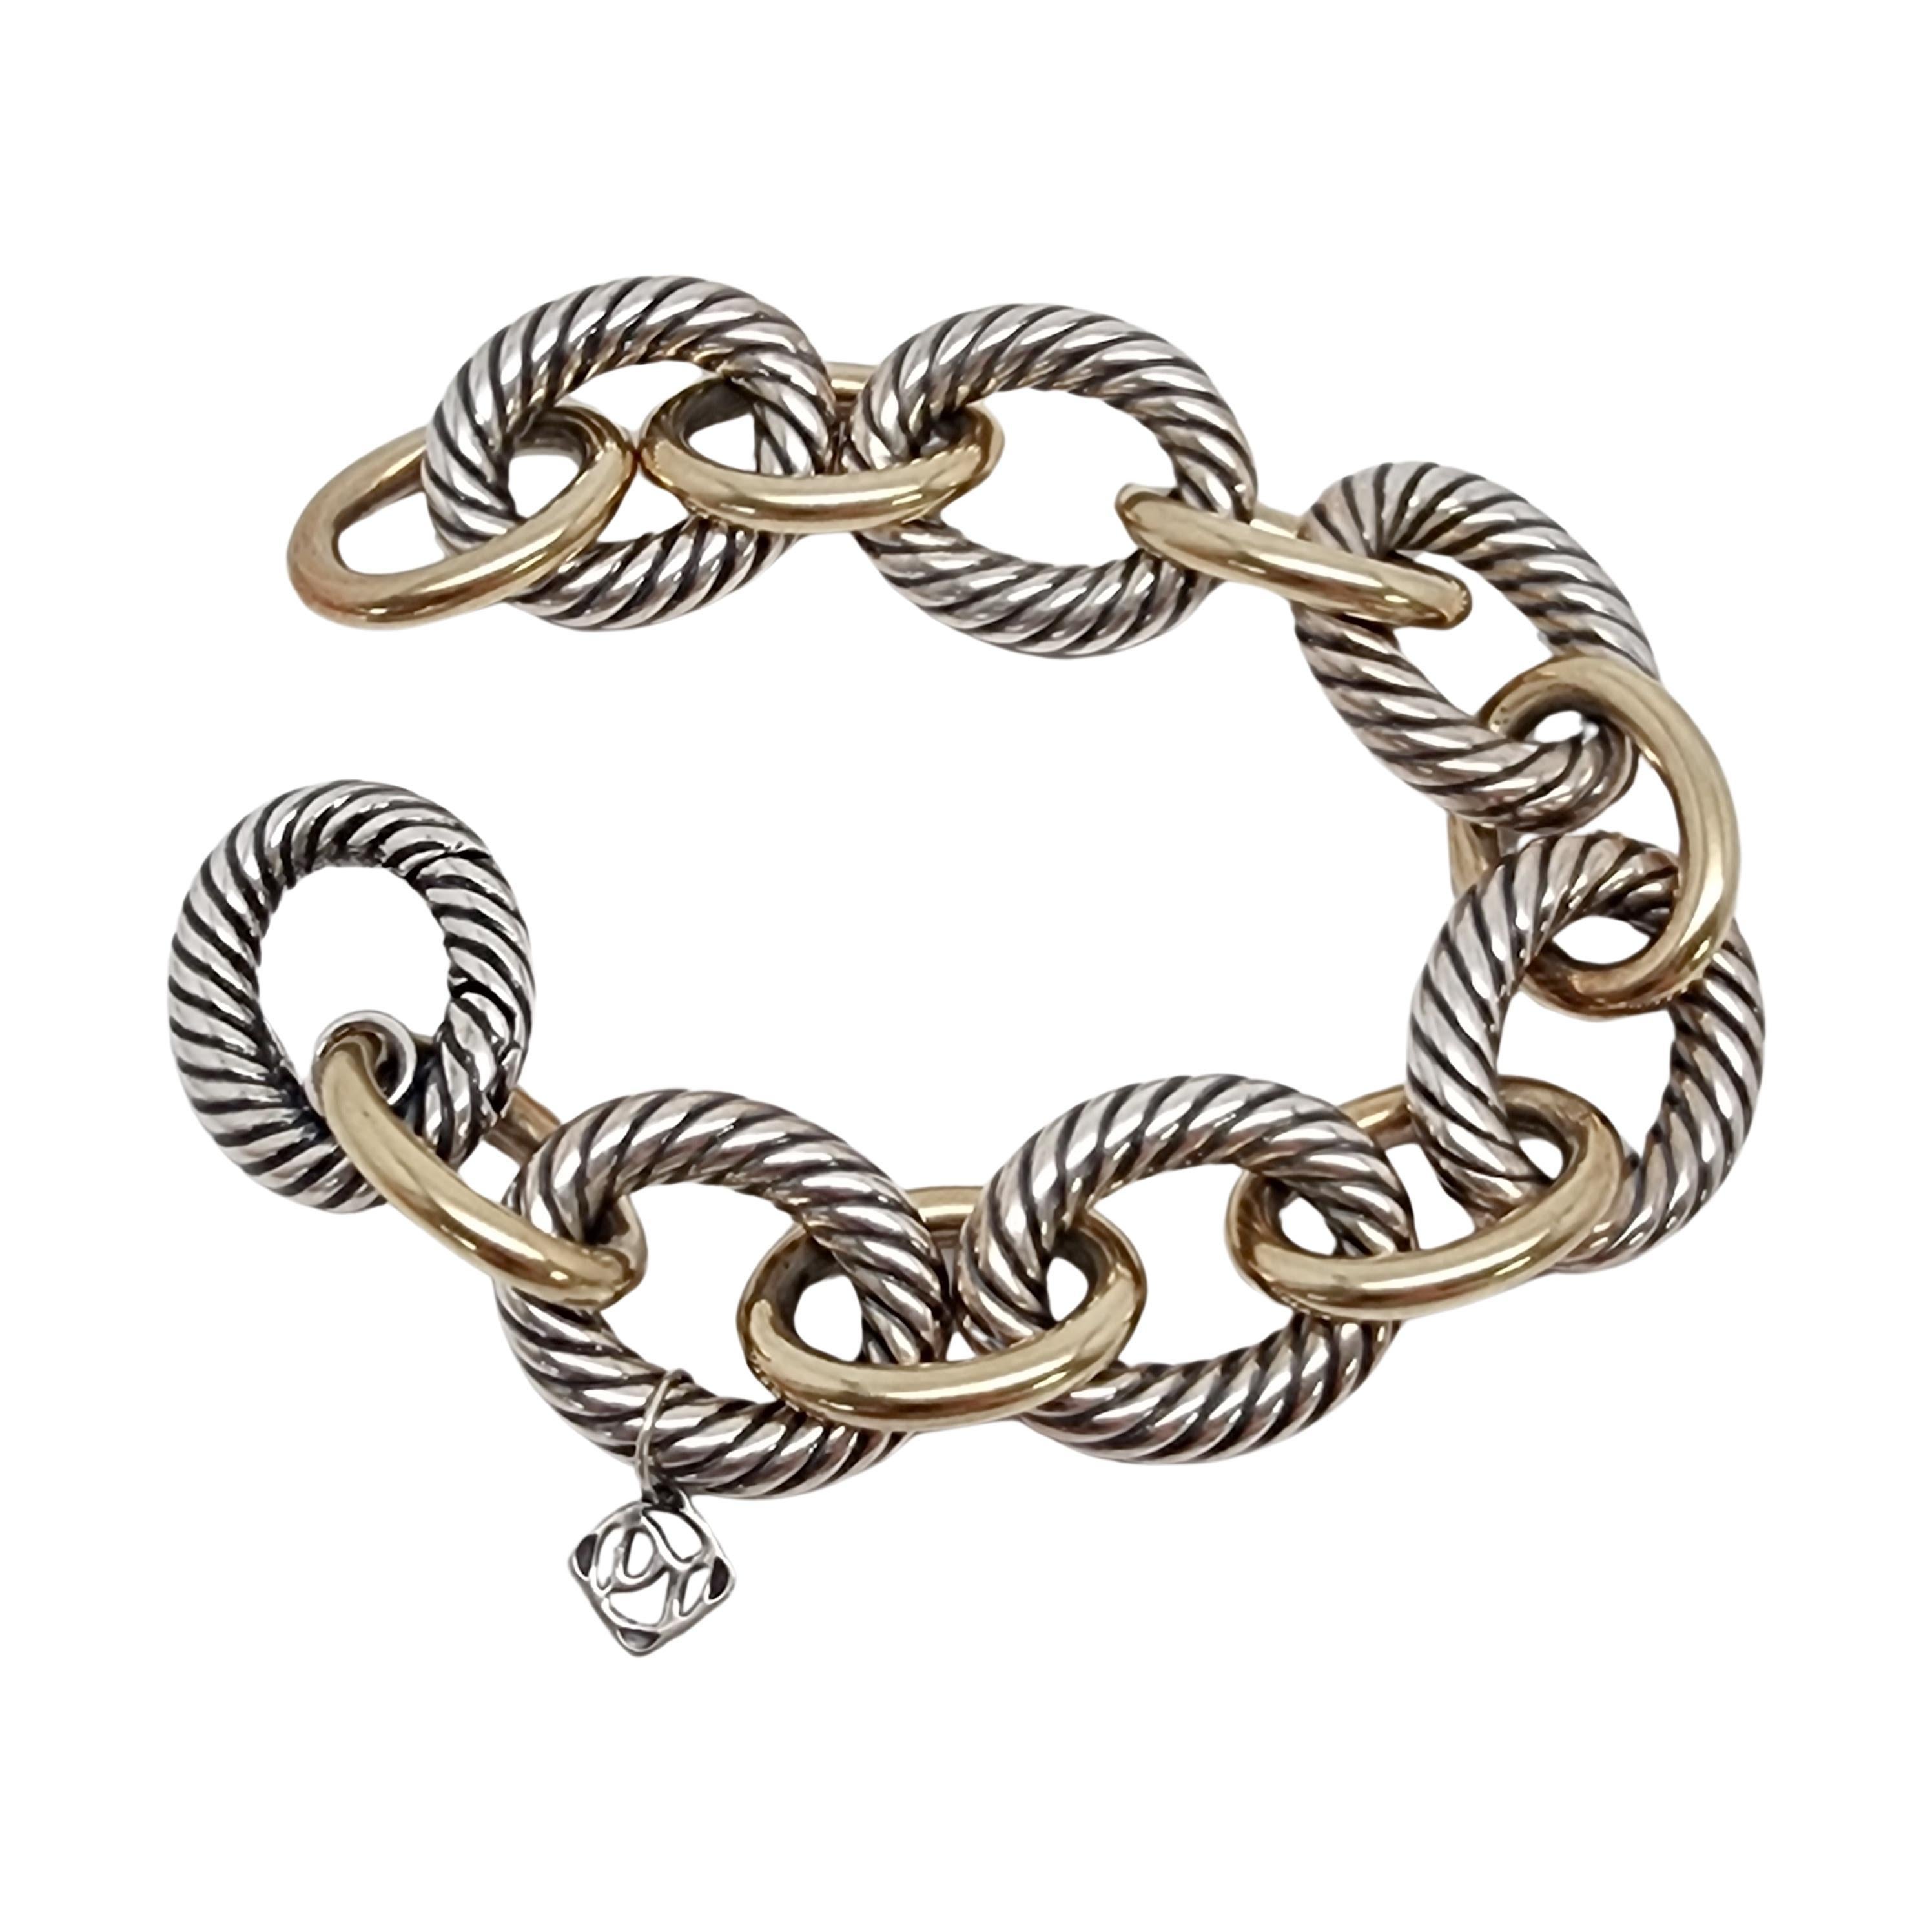 Sterling silver and 18K yellow gold plated oval link bracelet by David Yurman.

This large 18mm link bracelet features textured sterling silver oval links alternating with smooth gold plated oval links. The last link is a hidden clasp. DY tag